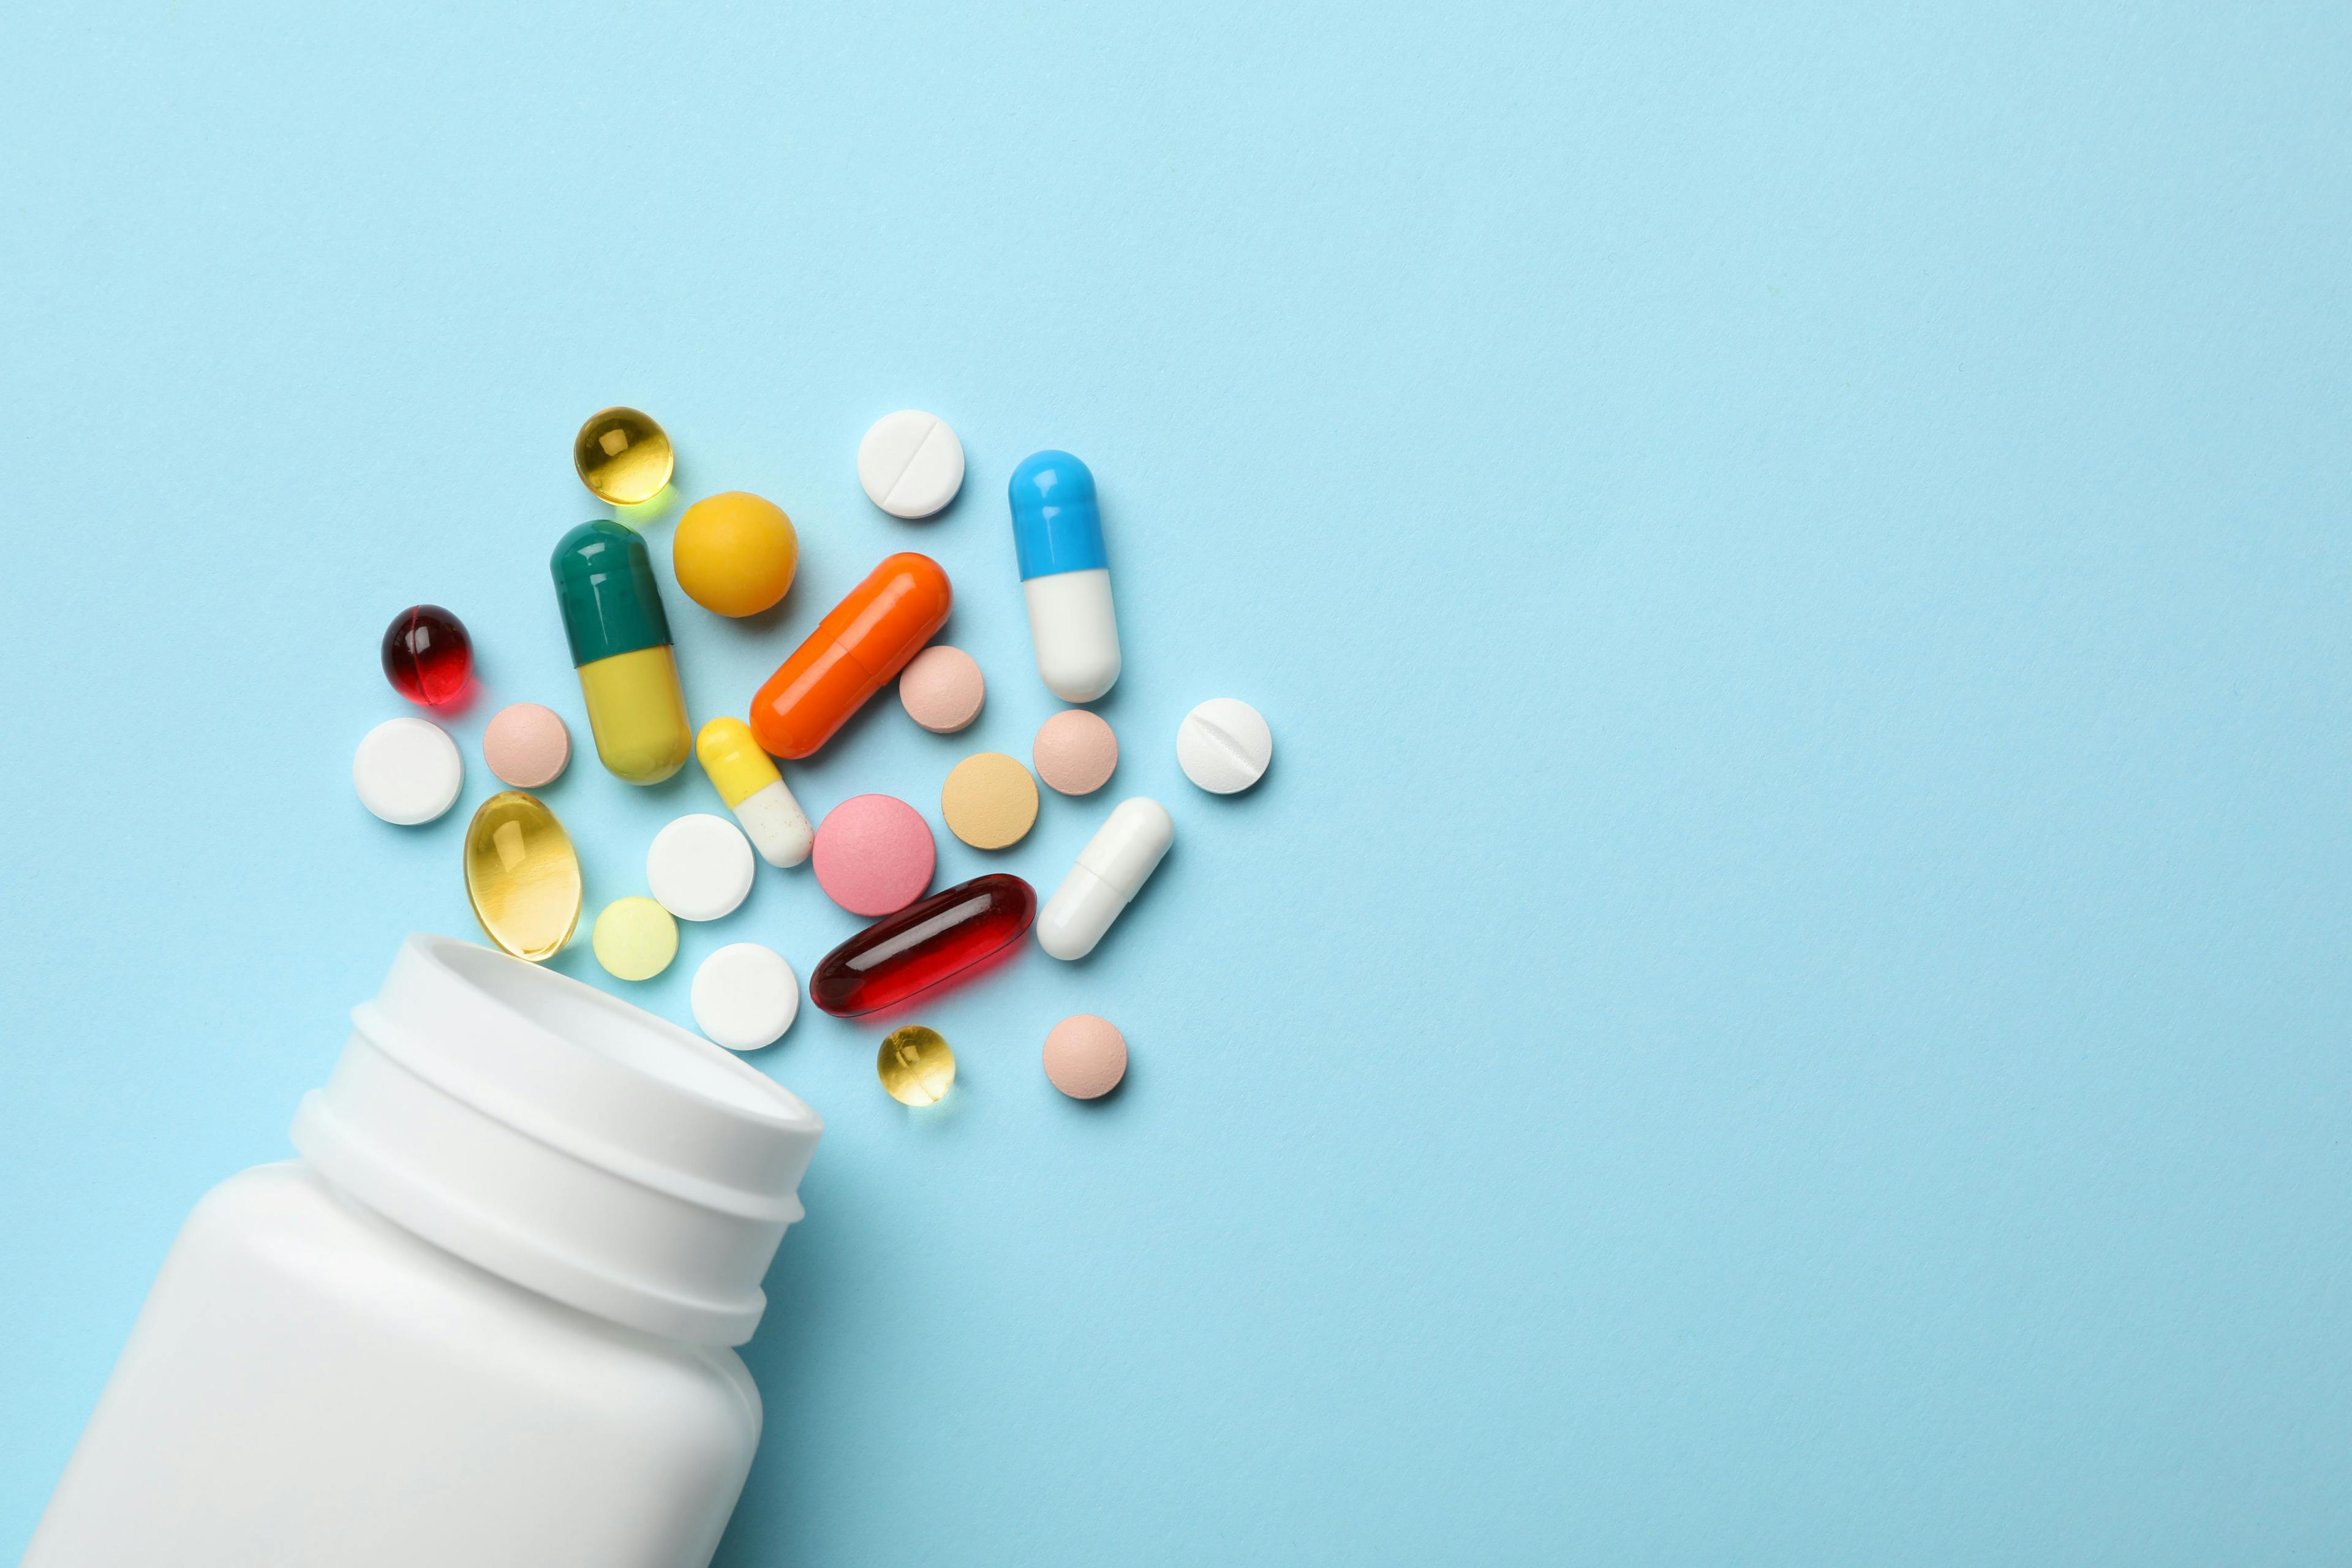 Pills spilling out of pill bottle | Image credit: New Africa - stock.adobe.com